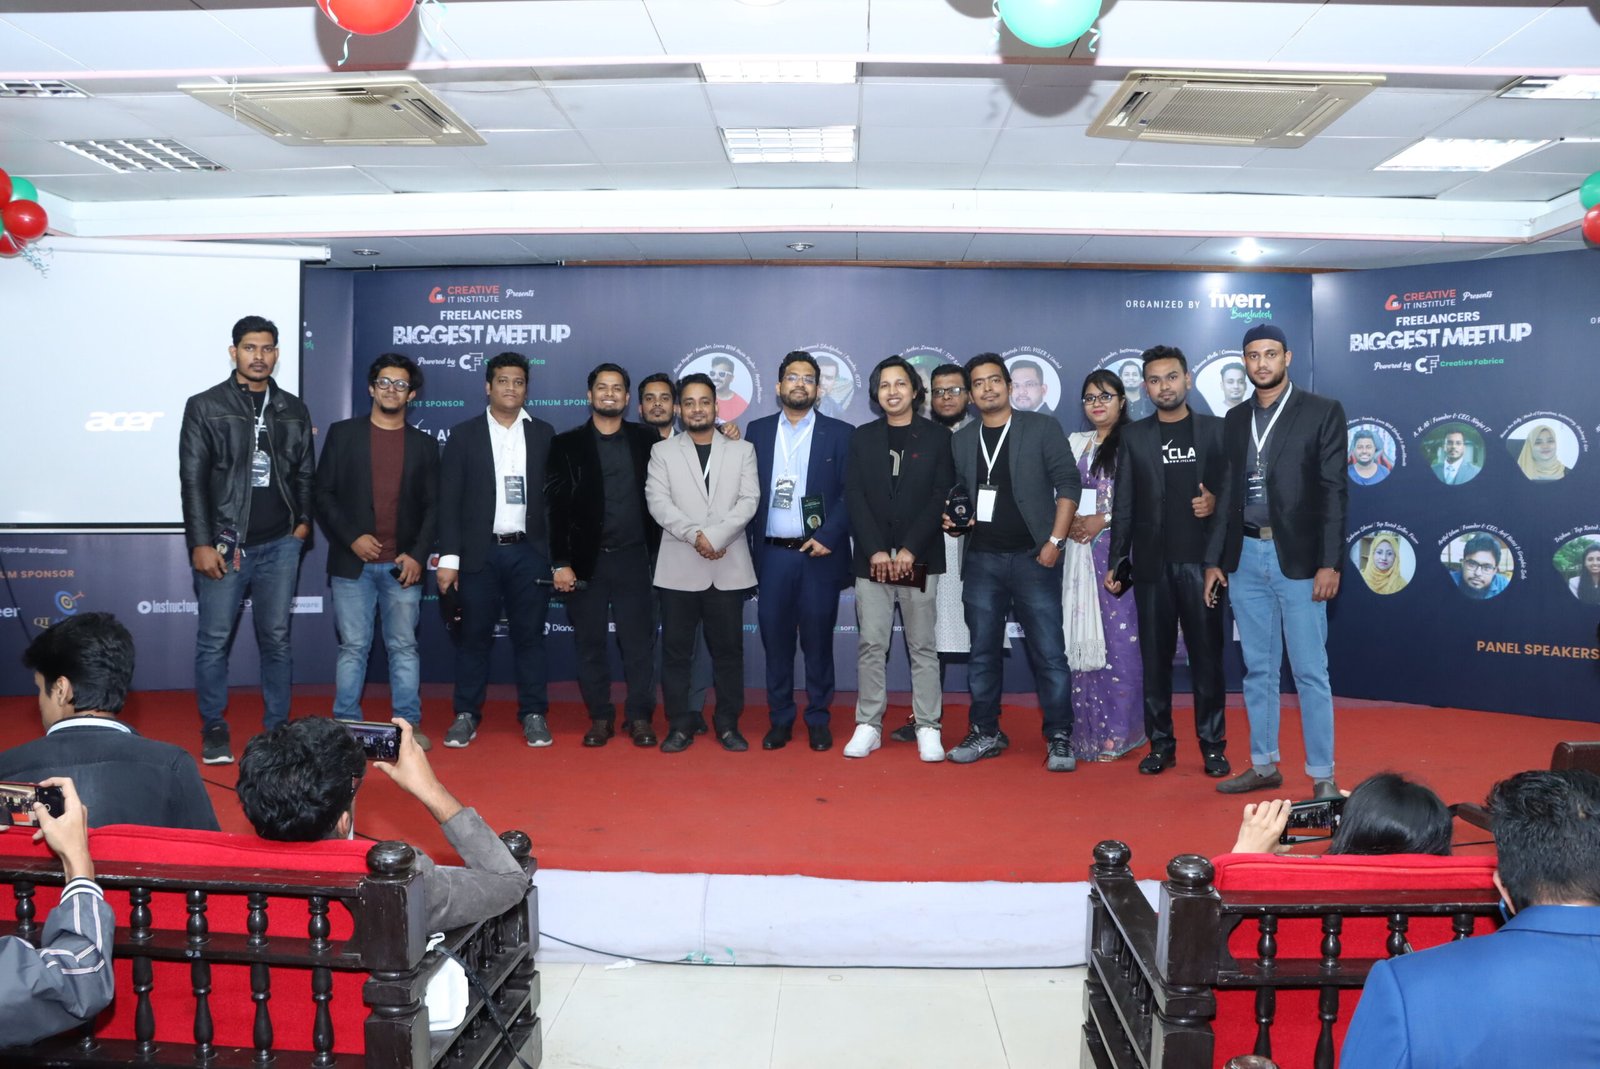 Fiverr Bangladesh organized the biggest meetup of the year with freelancers